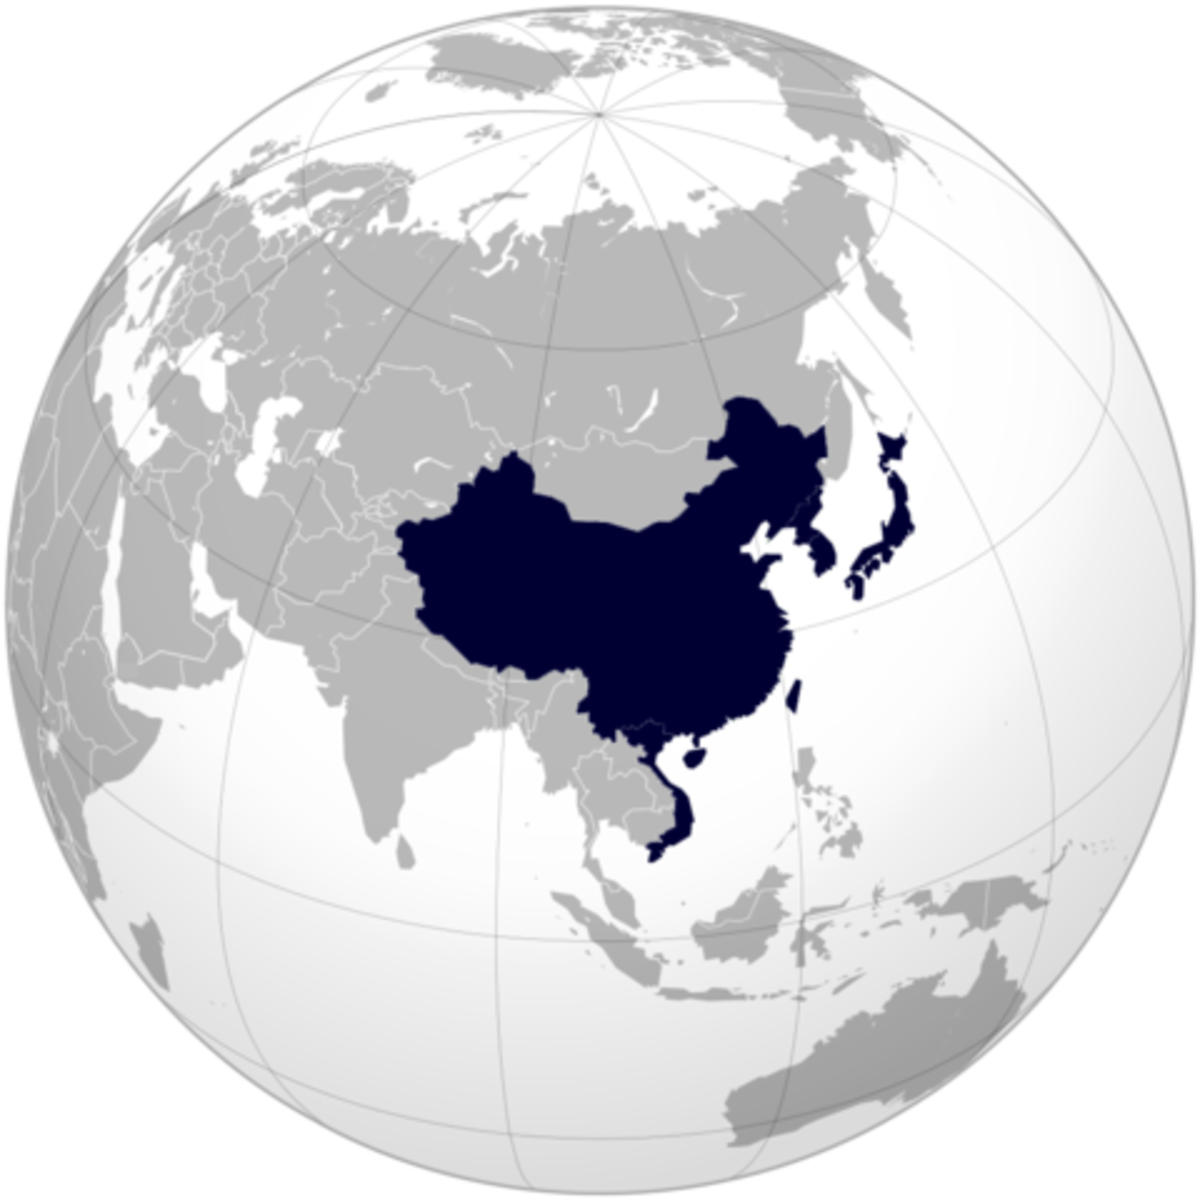 Regions and territories traditionally influenced by the Chinese language and culture